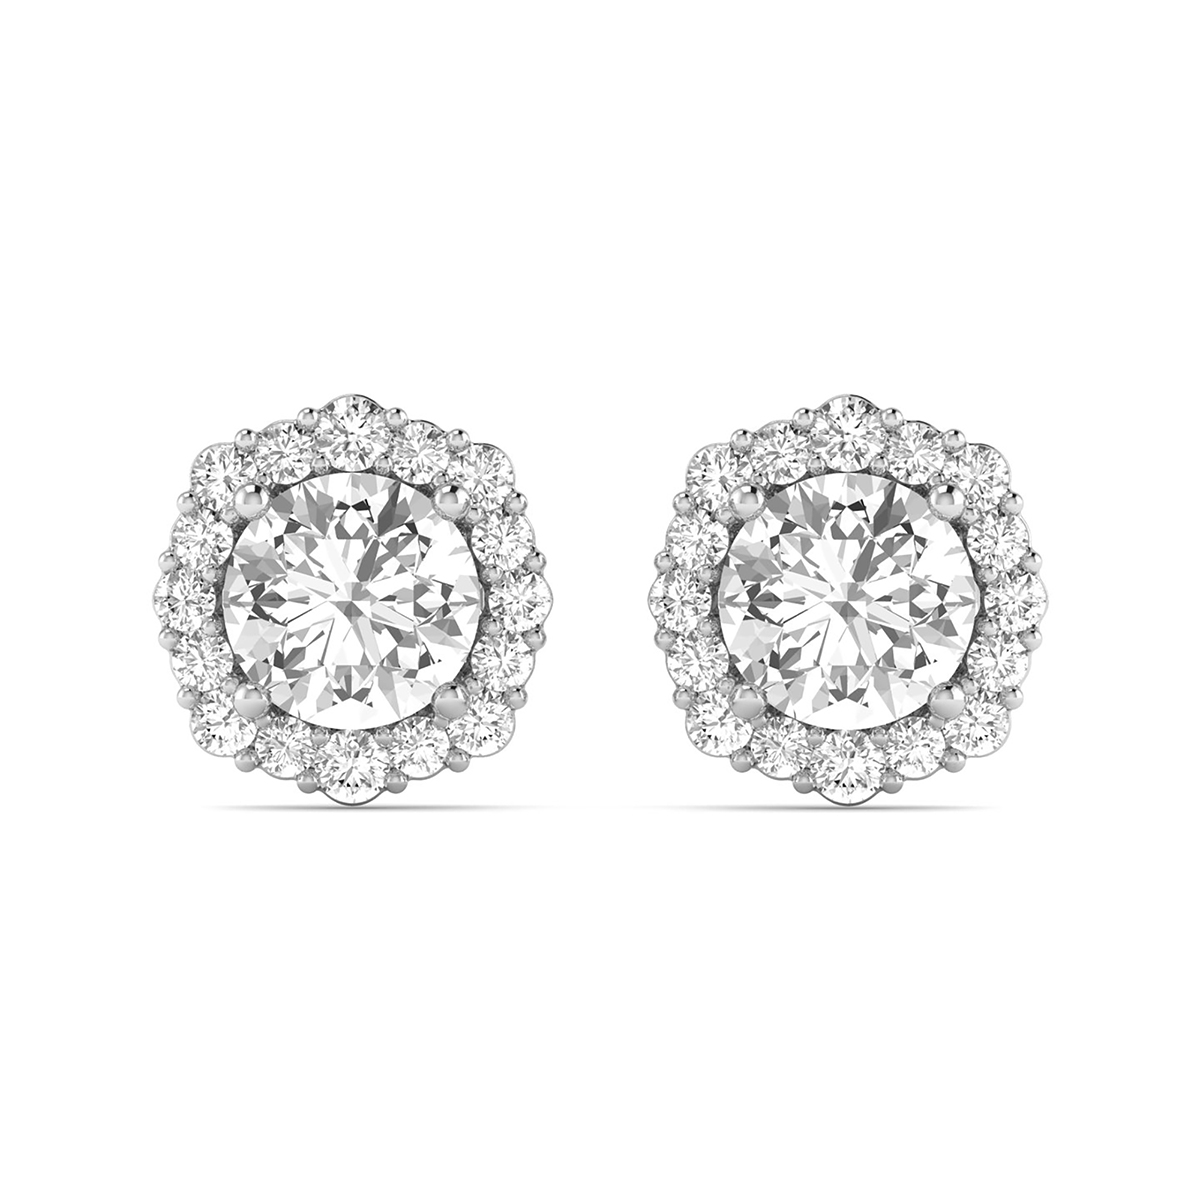 Image of 3/4 Carat TW Floral Halo Diamond Stud Earrings in 14K White Gold